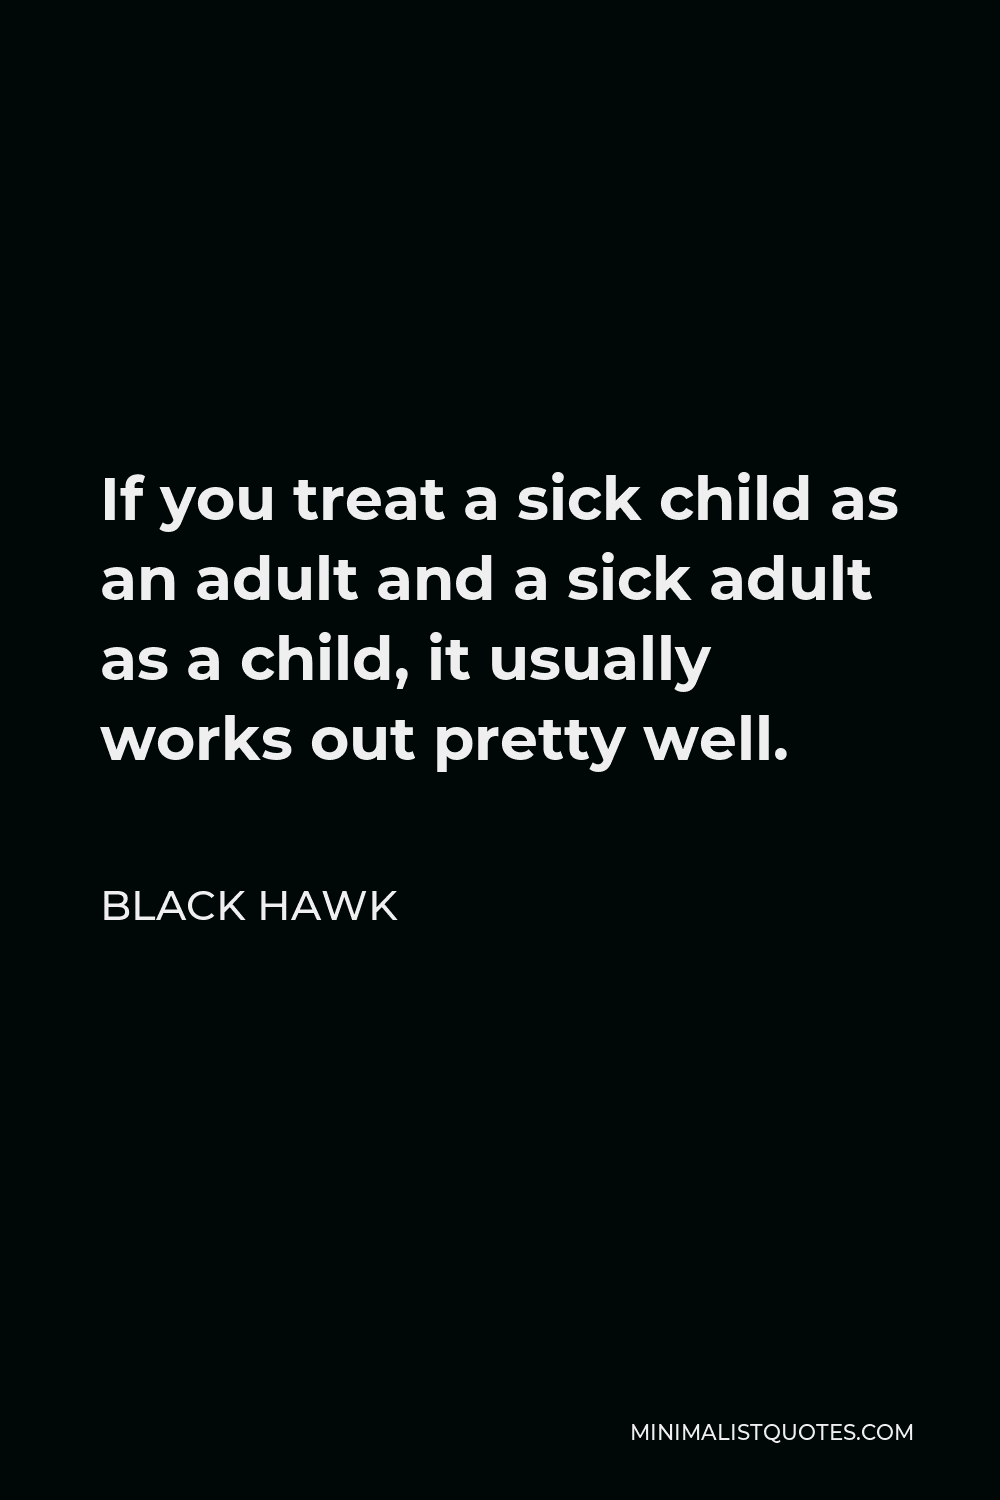 Black Hawk Quote - If you treat a sick child as an adult and a sick adult as a child, it usually works out pretty well.